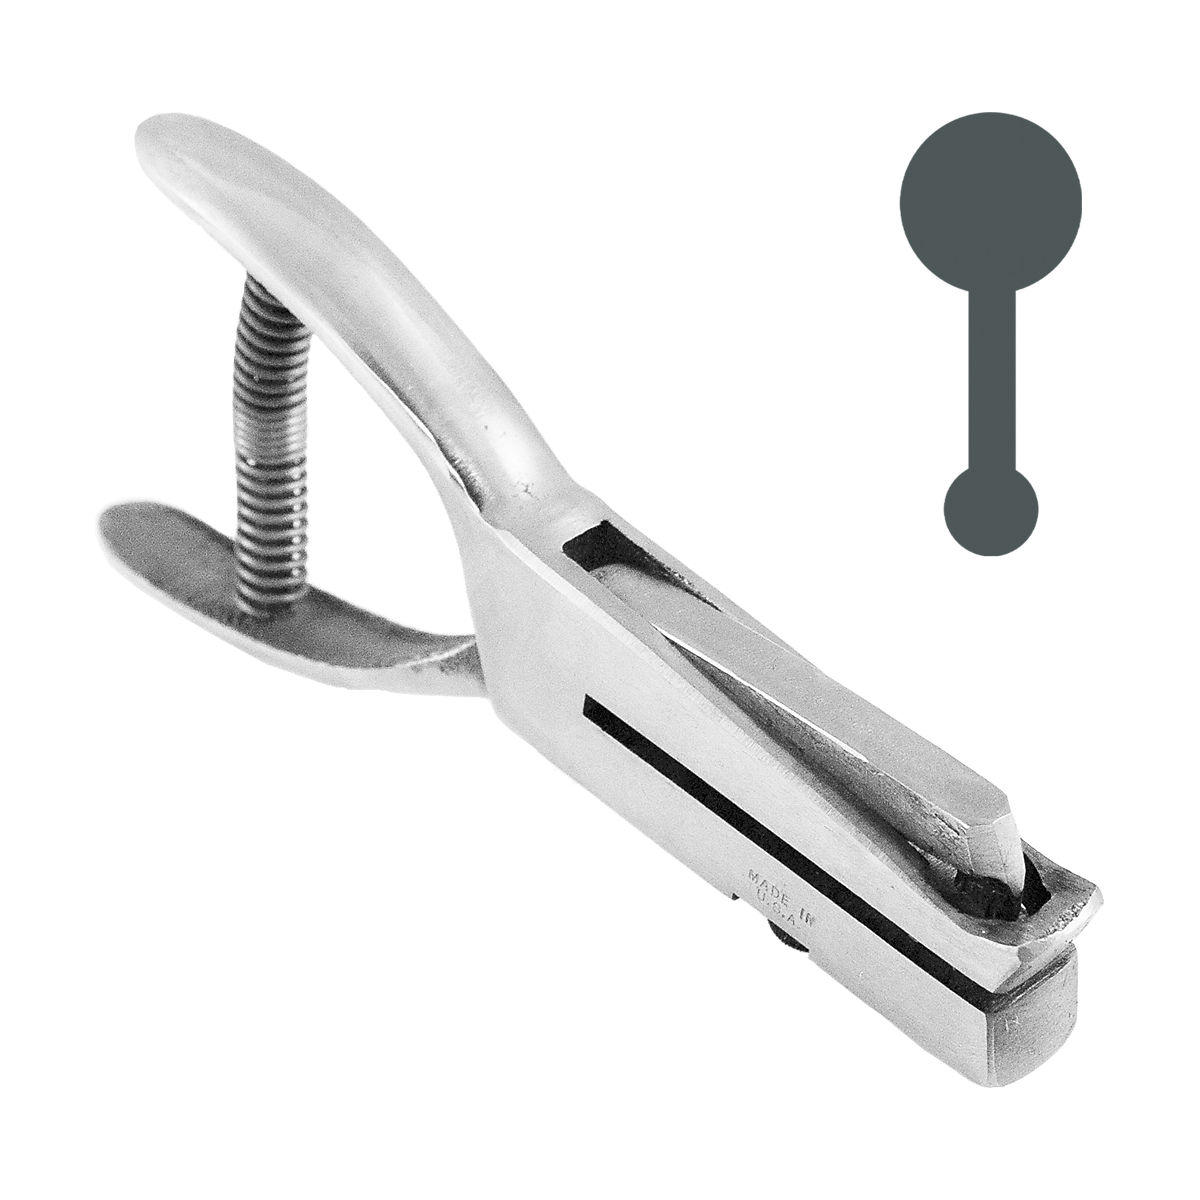 Key Hole Punch for Continuous Chain